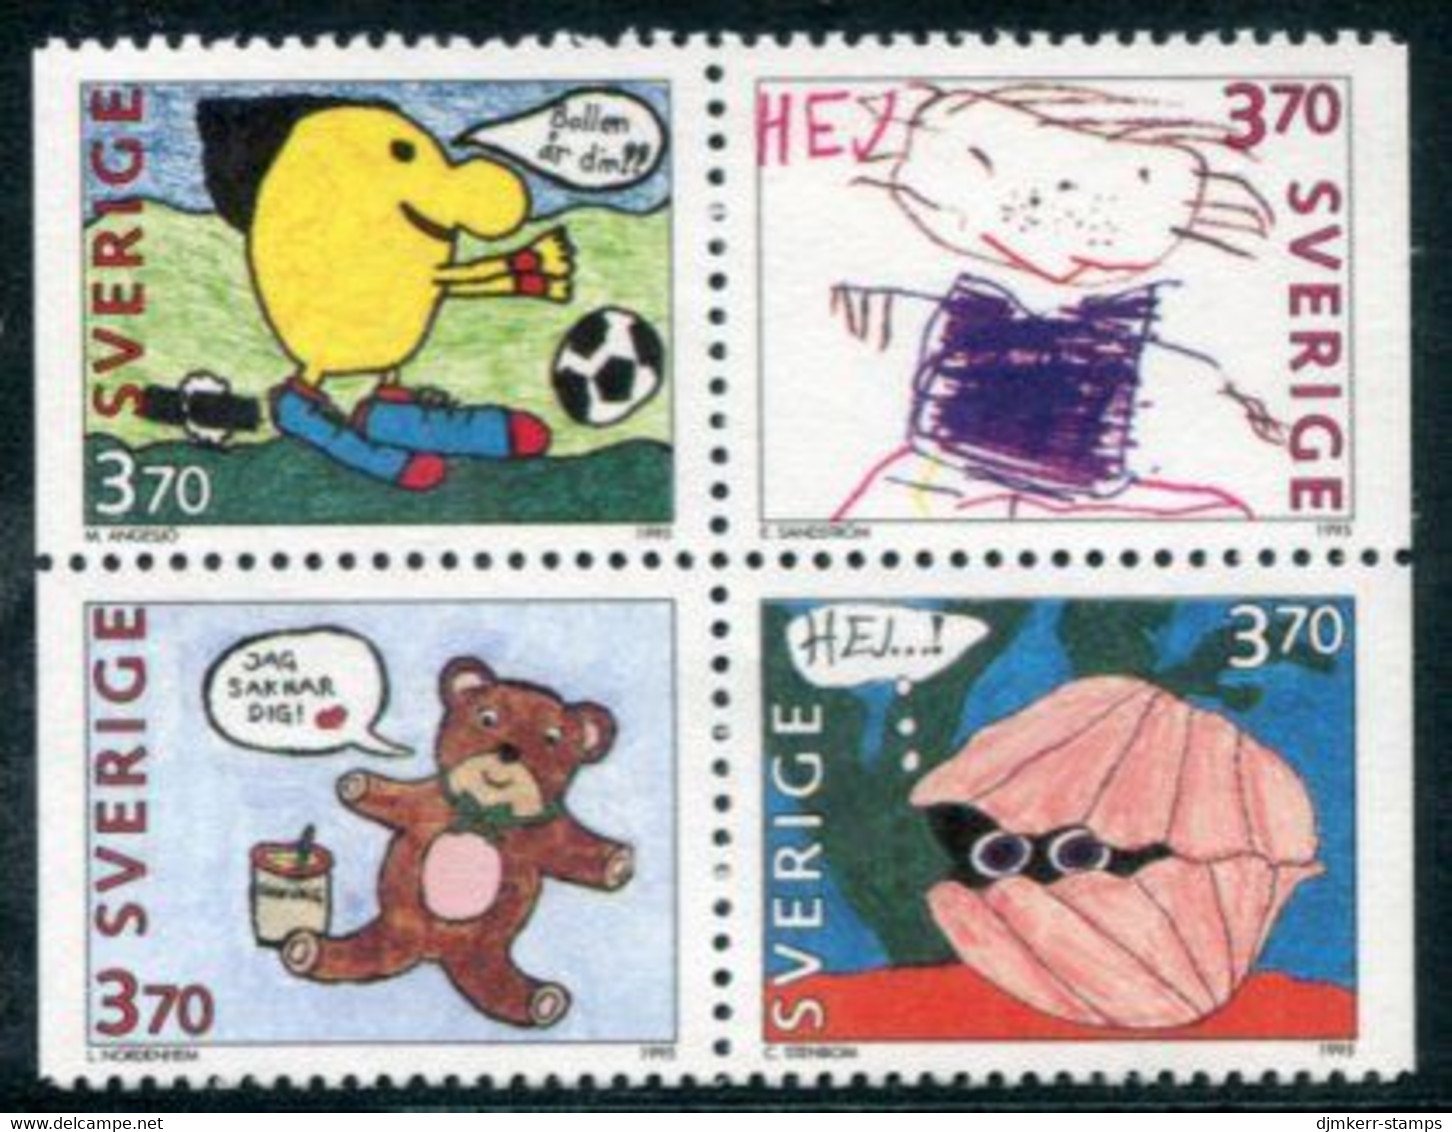 SWEDEN 1995 Greetings Stamps MNH / **  Michel 1894-97 - Nuevos